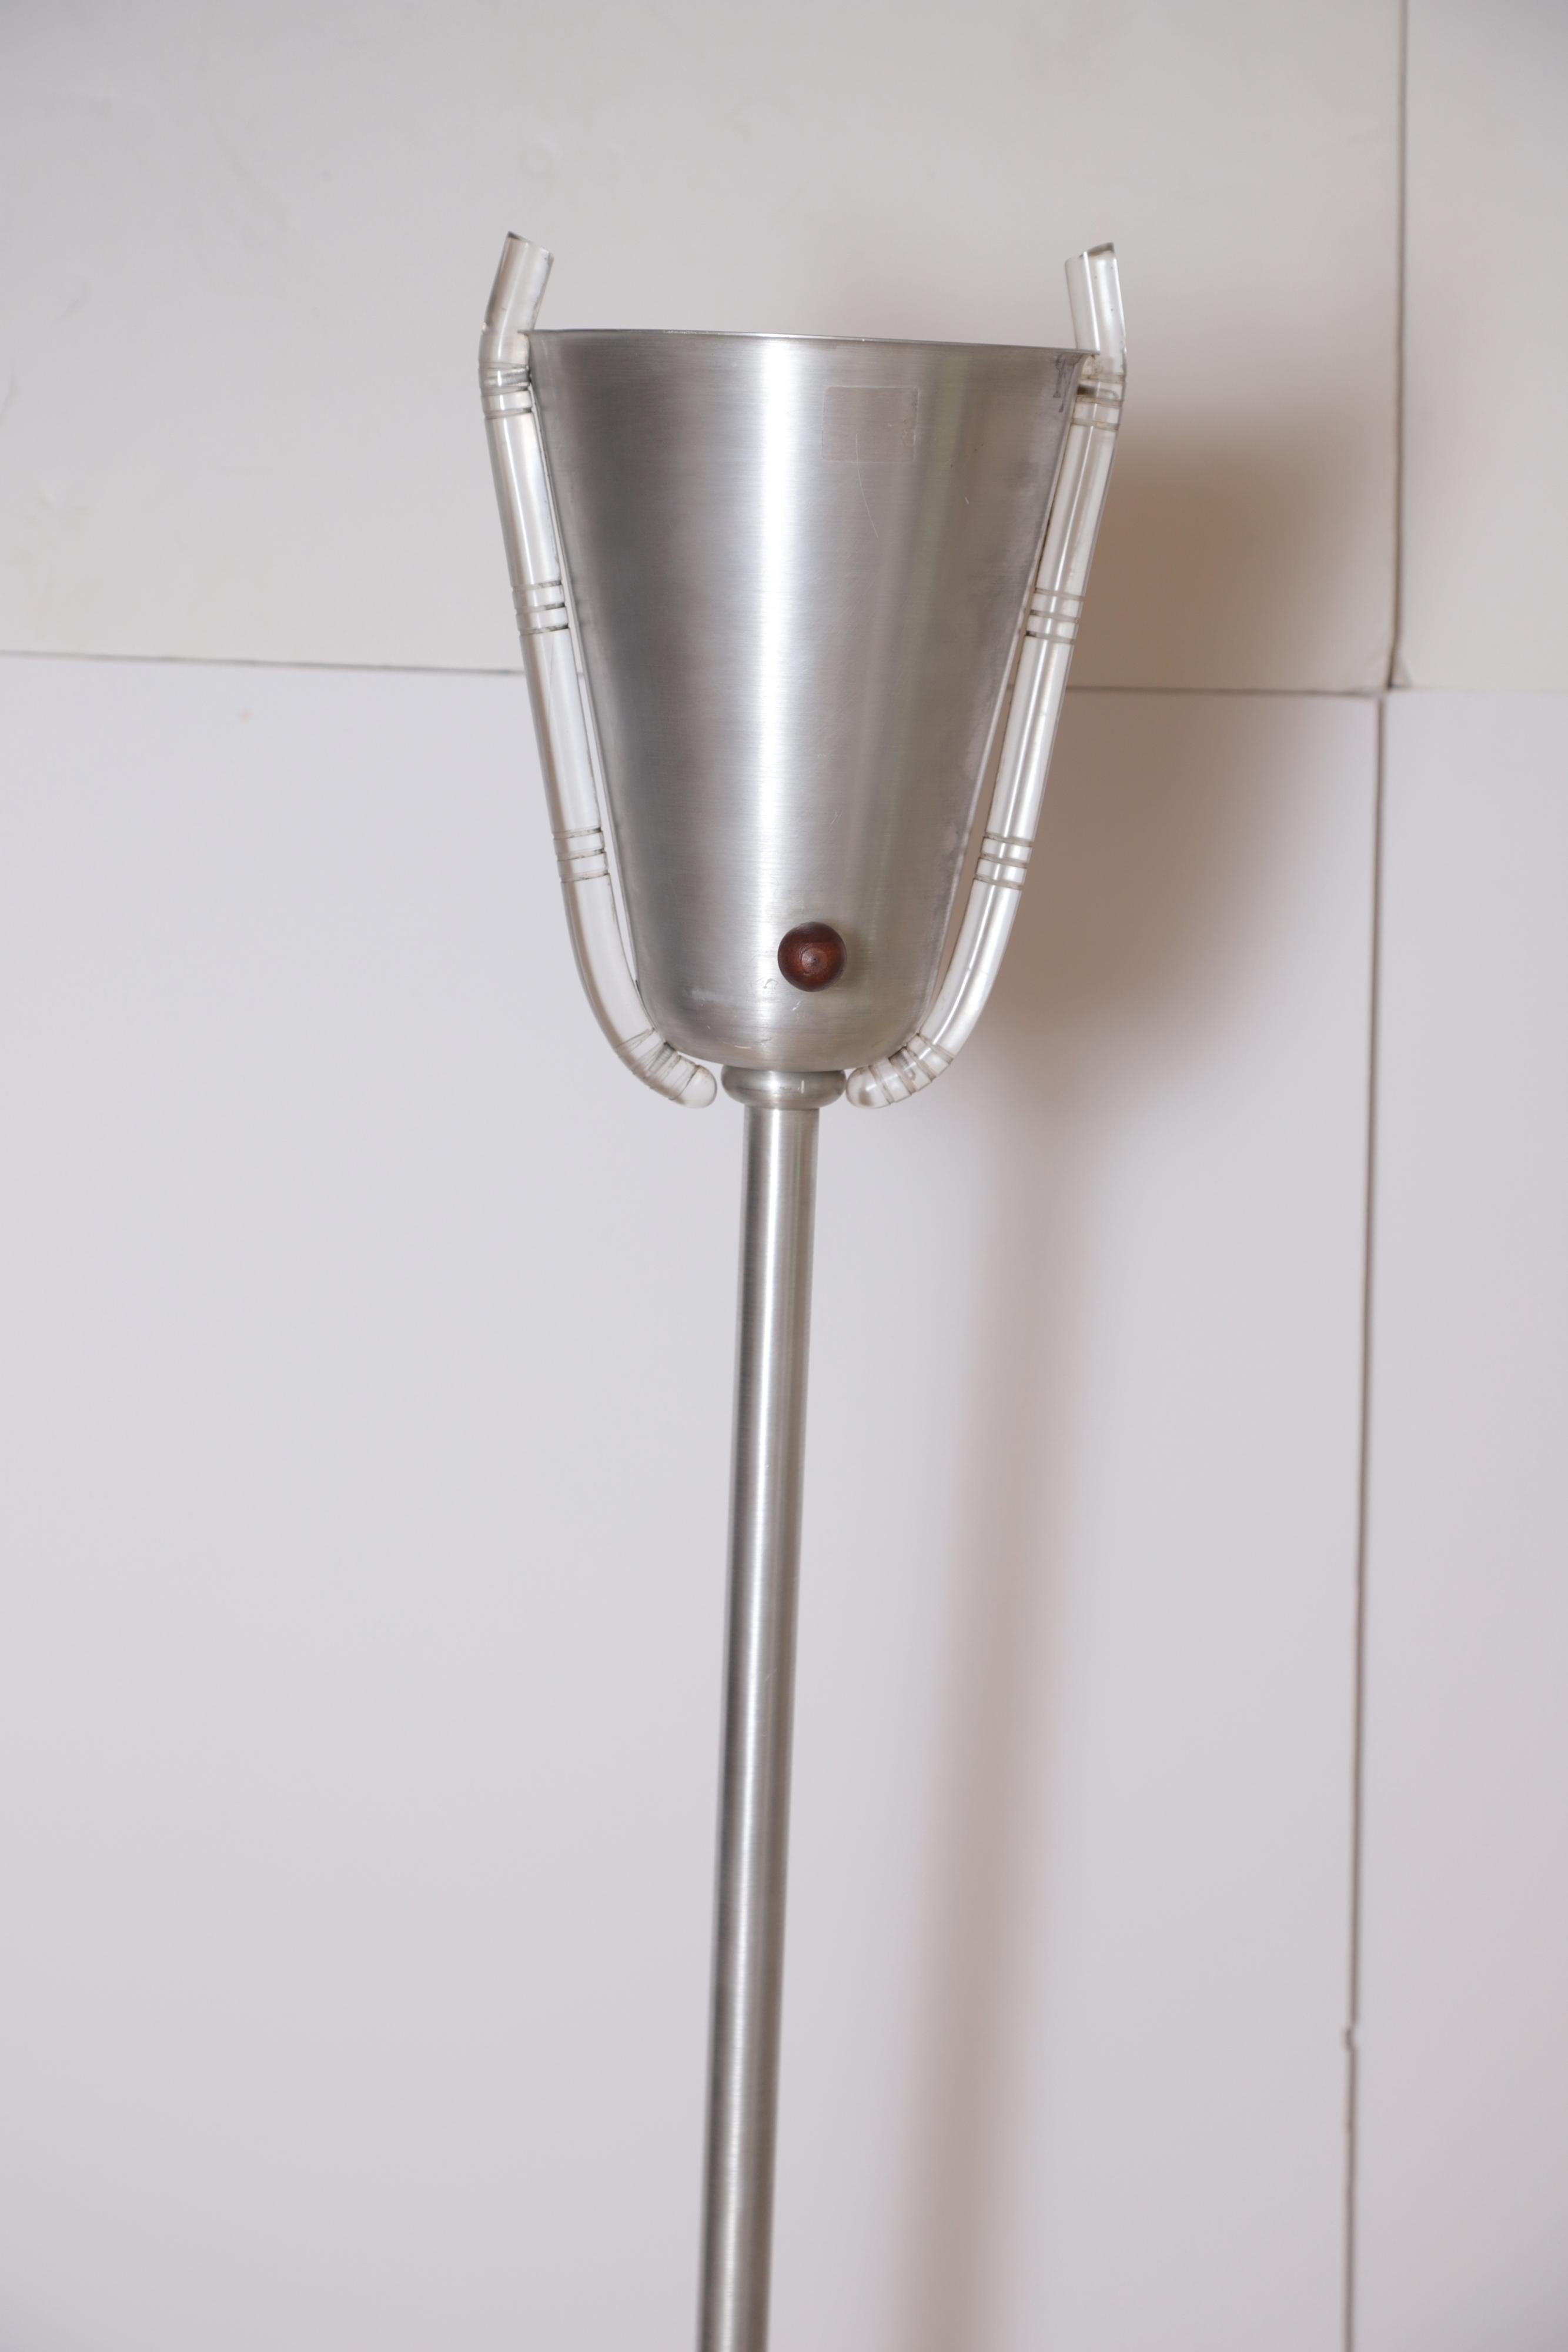 Machine age Art Deco Russel Wright spun aluminum Torchiere Torchierre Lucite Russell Wright up light floor lamp

Uncommon Classic banded Lucite shade ornamentation, difficult to source in this condition. Original wood switch knob.
Impressed